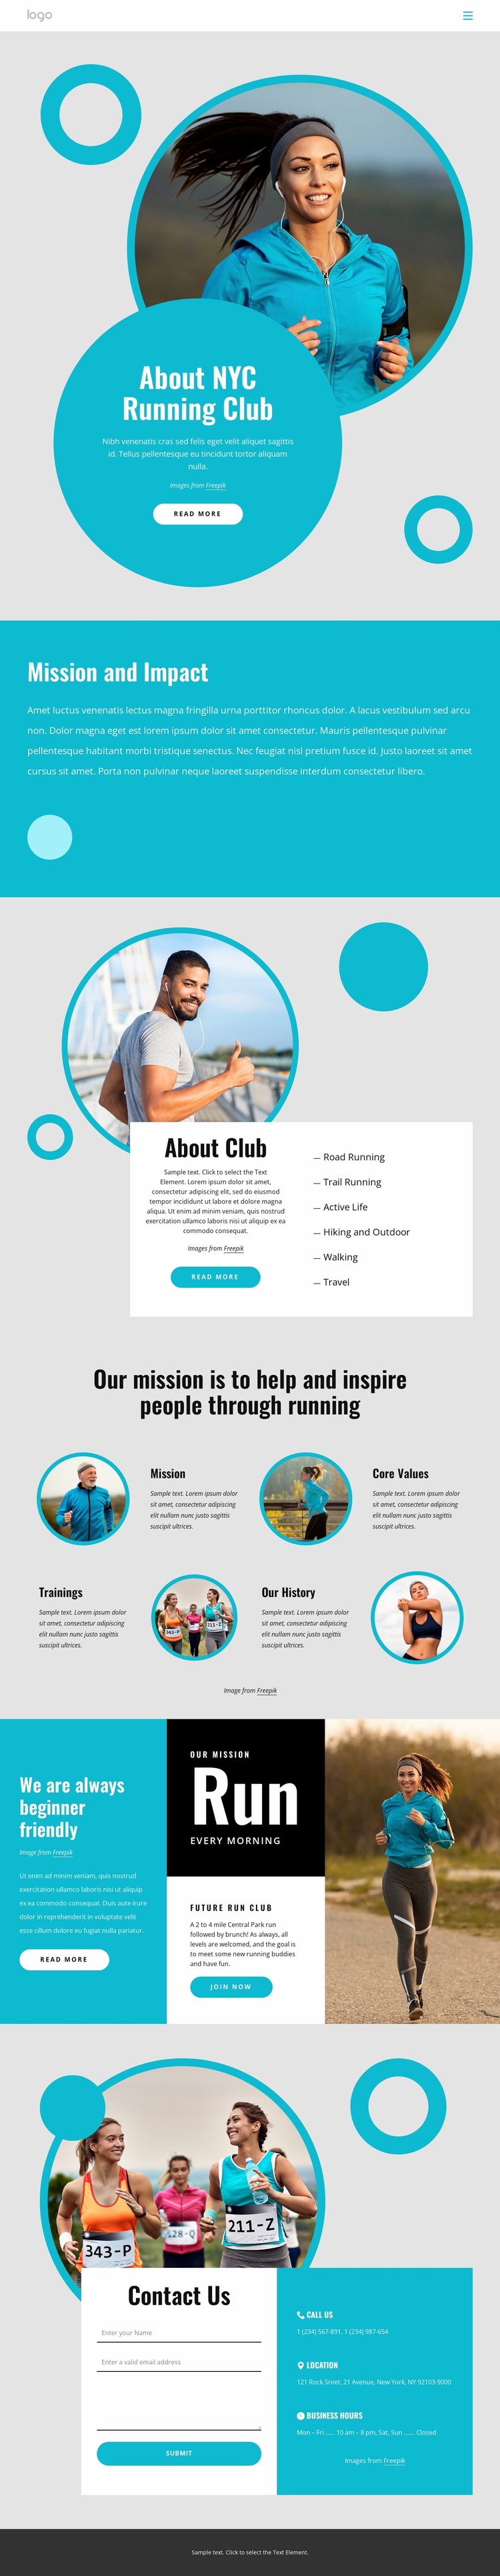 About NYC running club Website Template